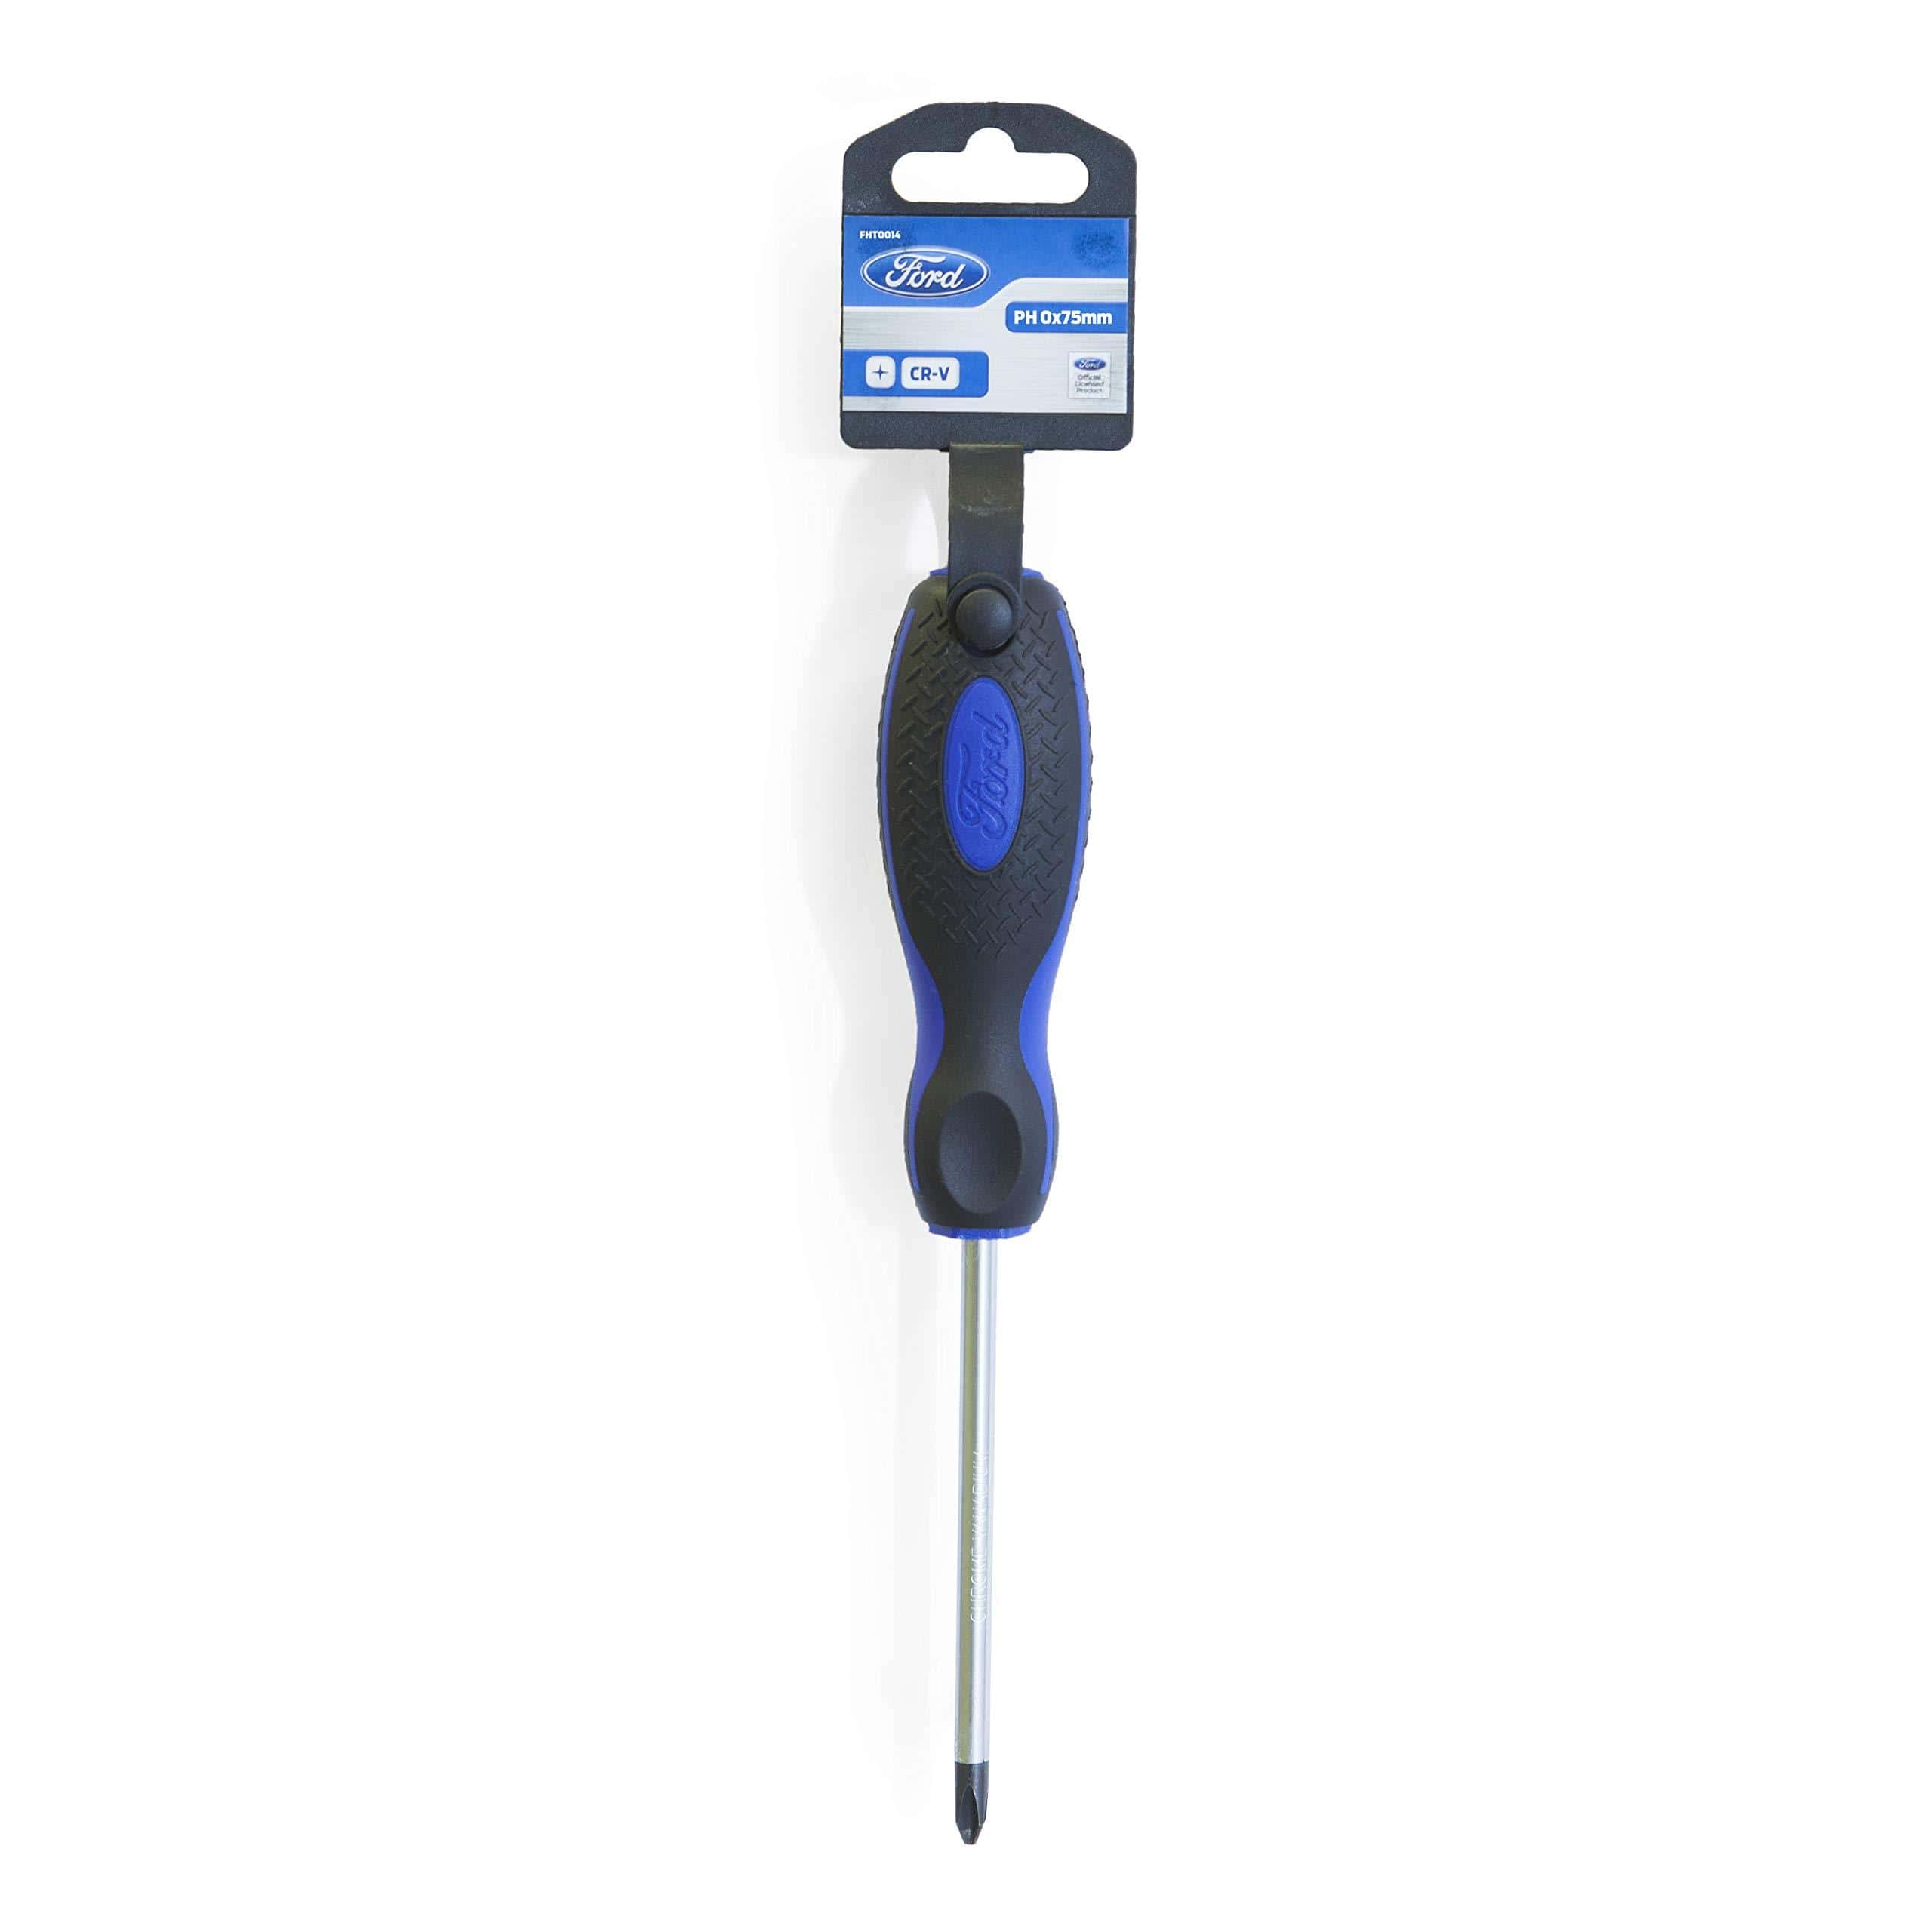 Ford Phillips Screwdriver | Supply Master | Accra, Ghana Tools Building Steel Engineering Hardware tool